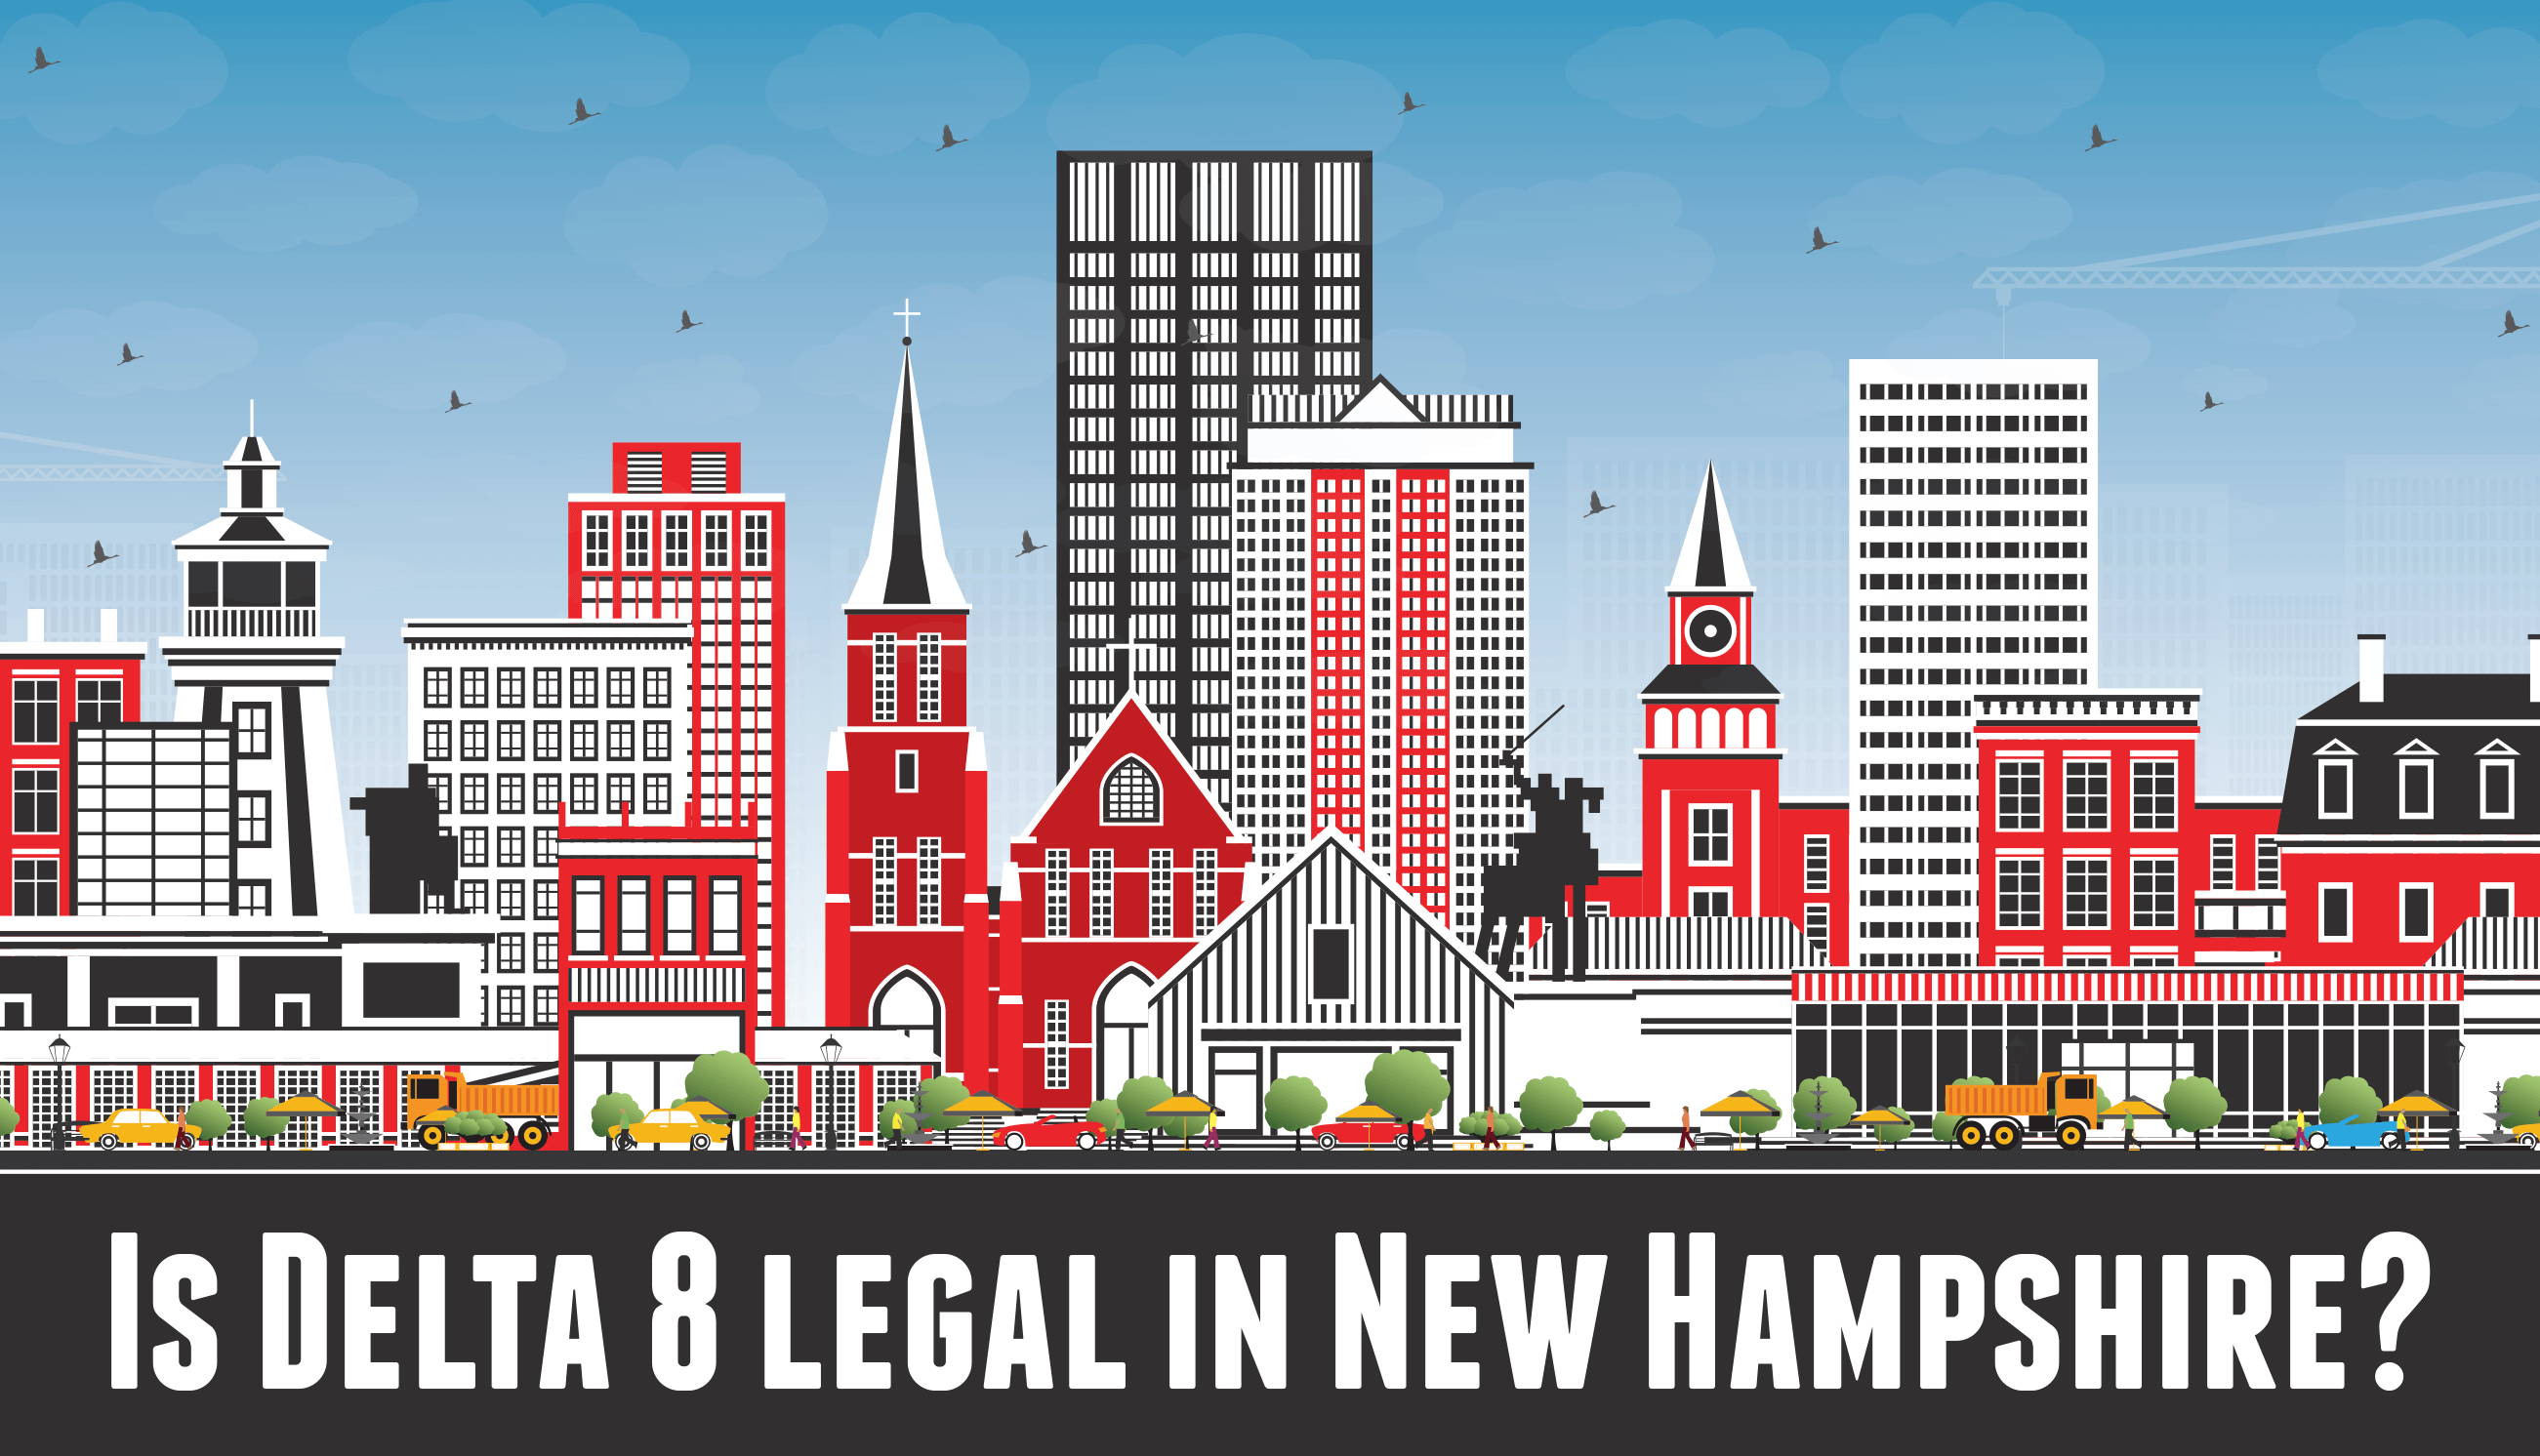 Is Delta 8 legal in New Hampshire